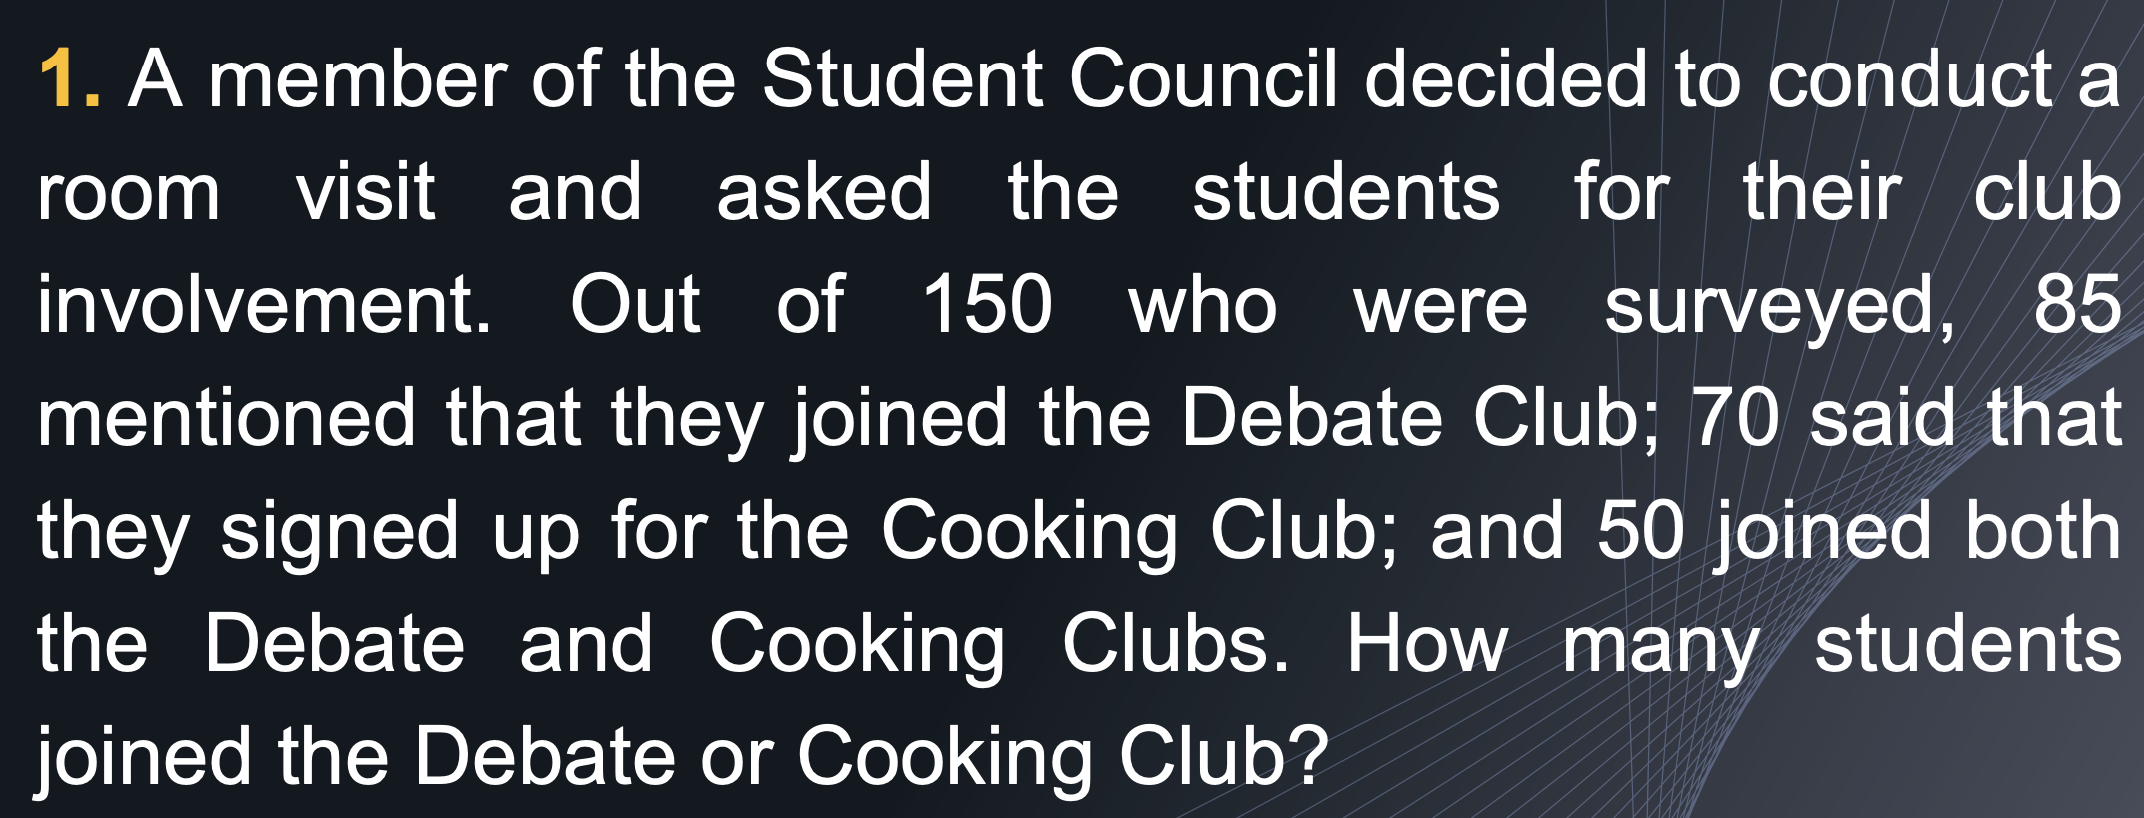 1 A Member Of The Student Council Decided To Conduct A Room Visit And Asked The Students For Their Club Involvement Ou 1